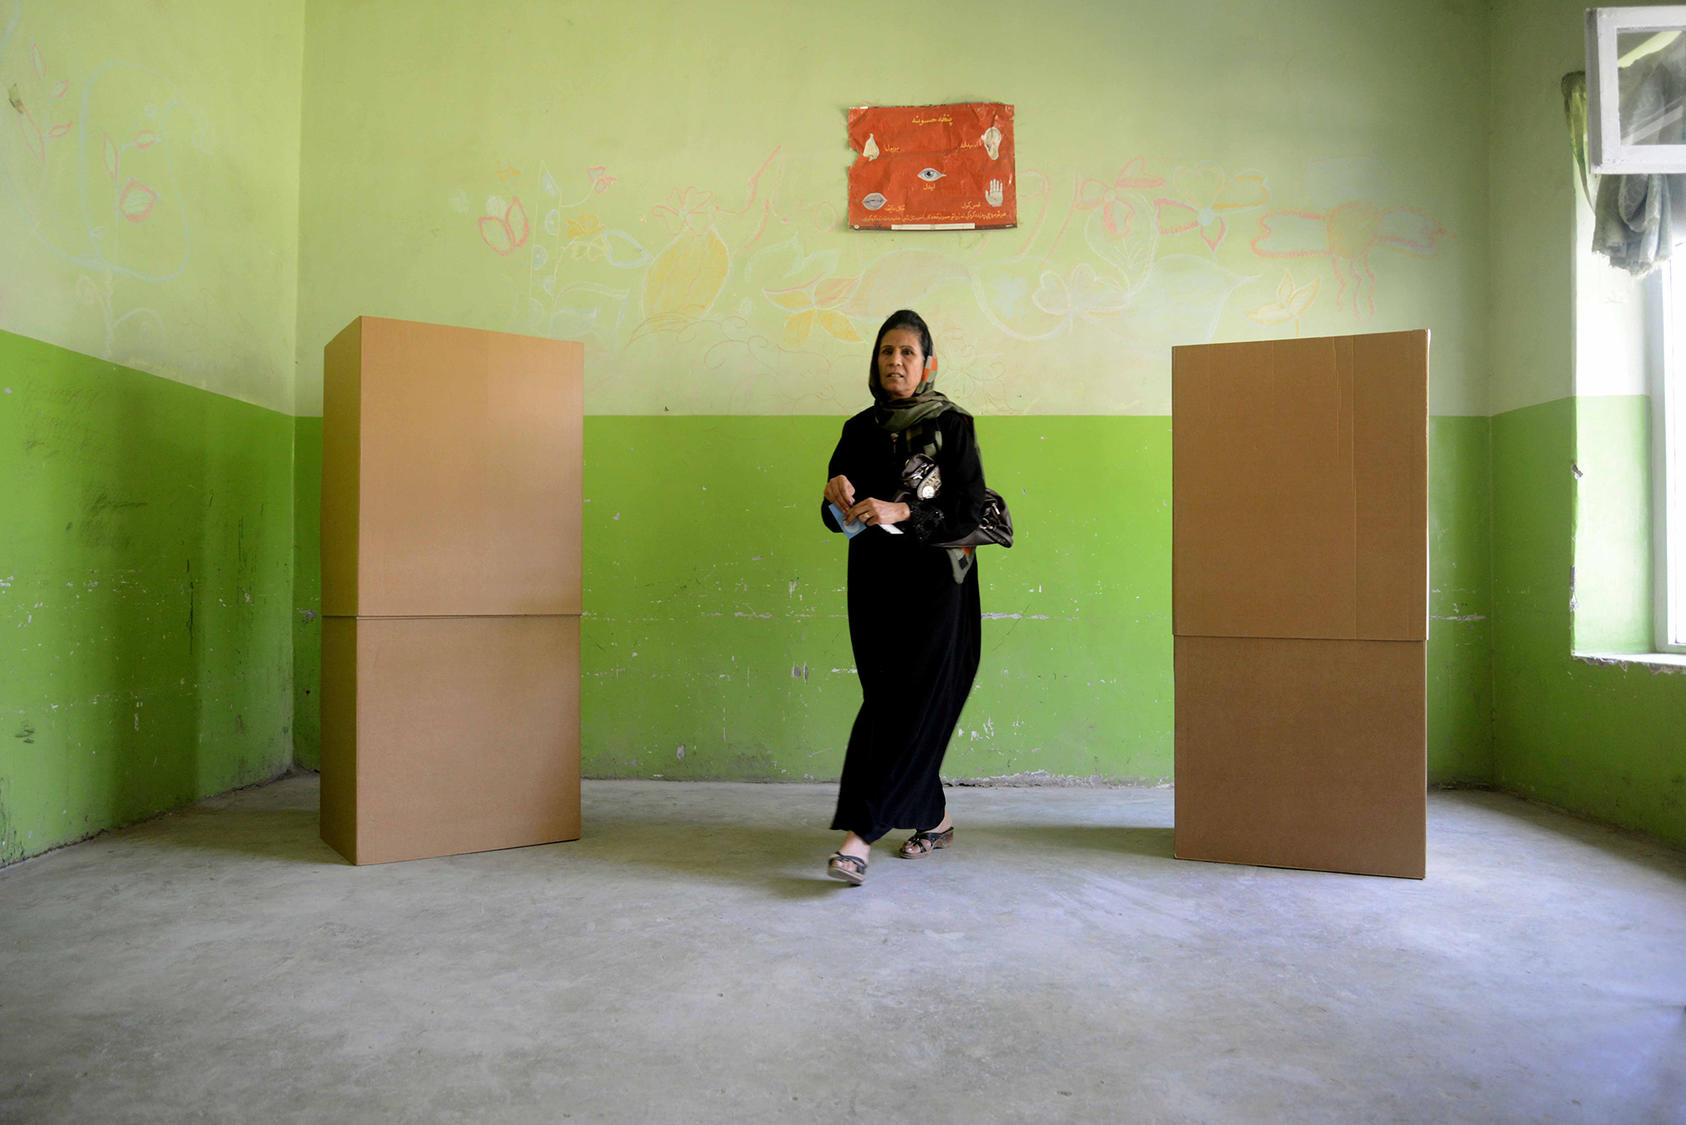 A voter walks to cast her ballot in 2014 during one of Afghanistan’s several recent disputed elections. Strengthening the credibility of elections is essential to sustaining voter turnout and governments’ legitimacy.